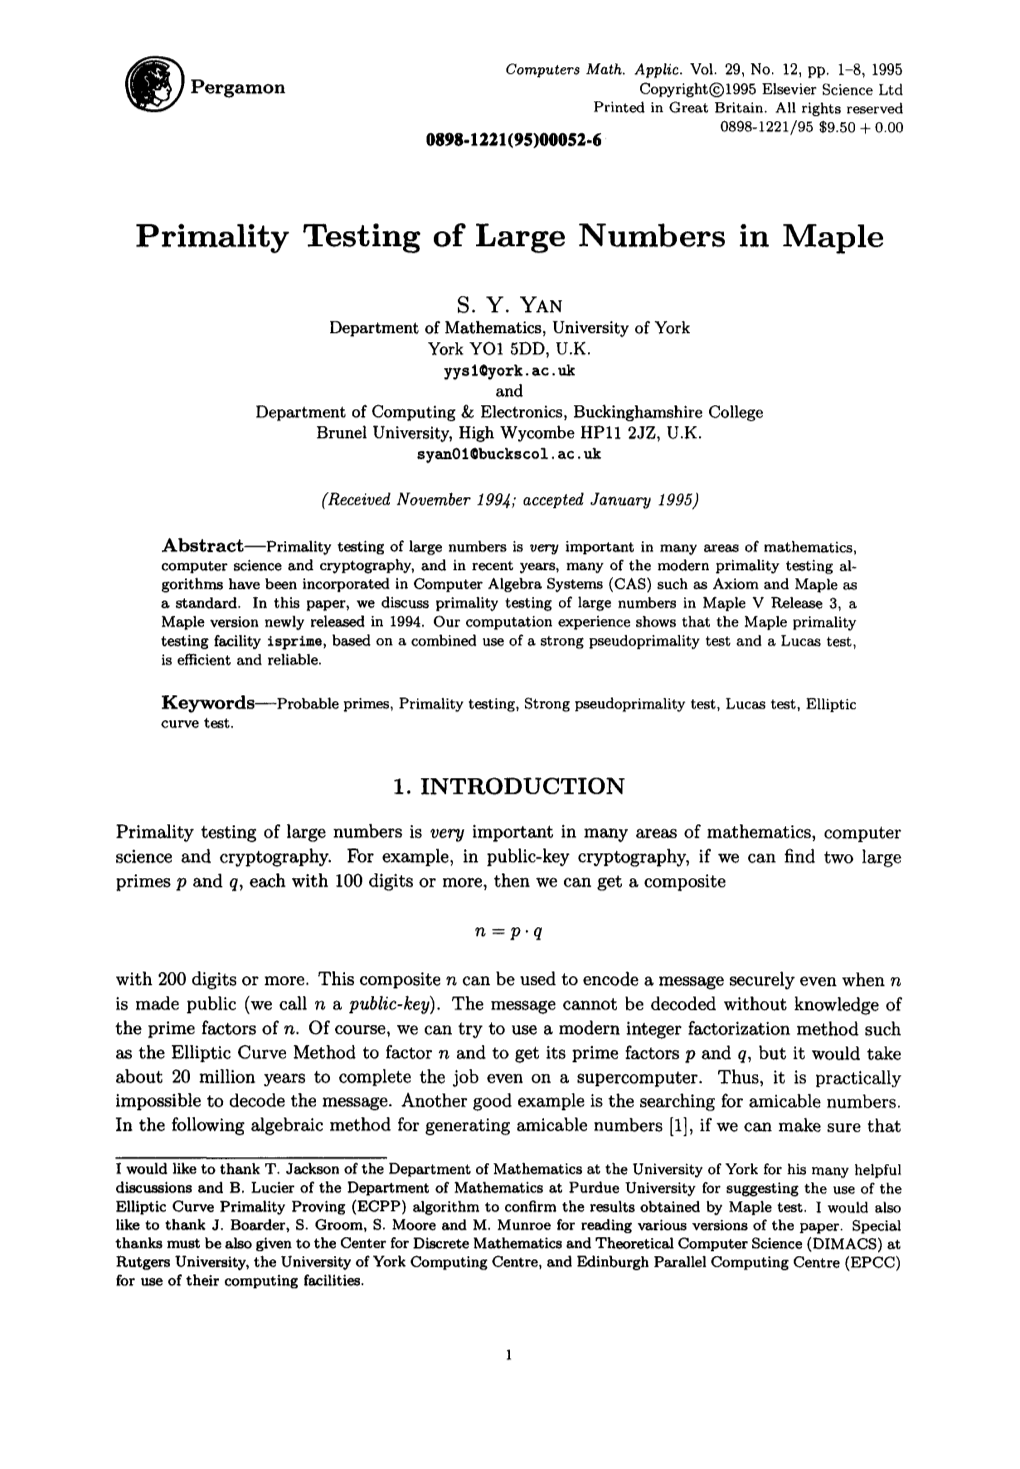 Primality Testing of Large Numbers in Maple